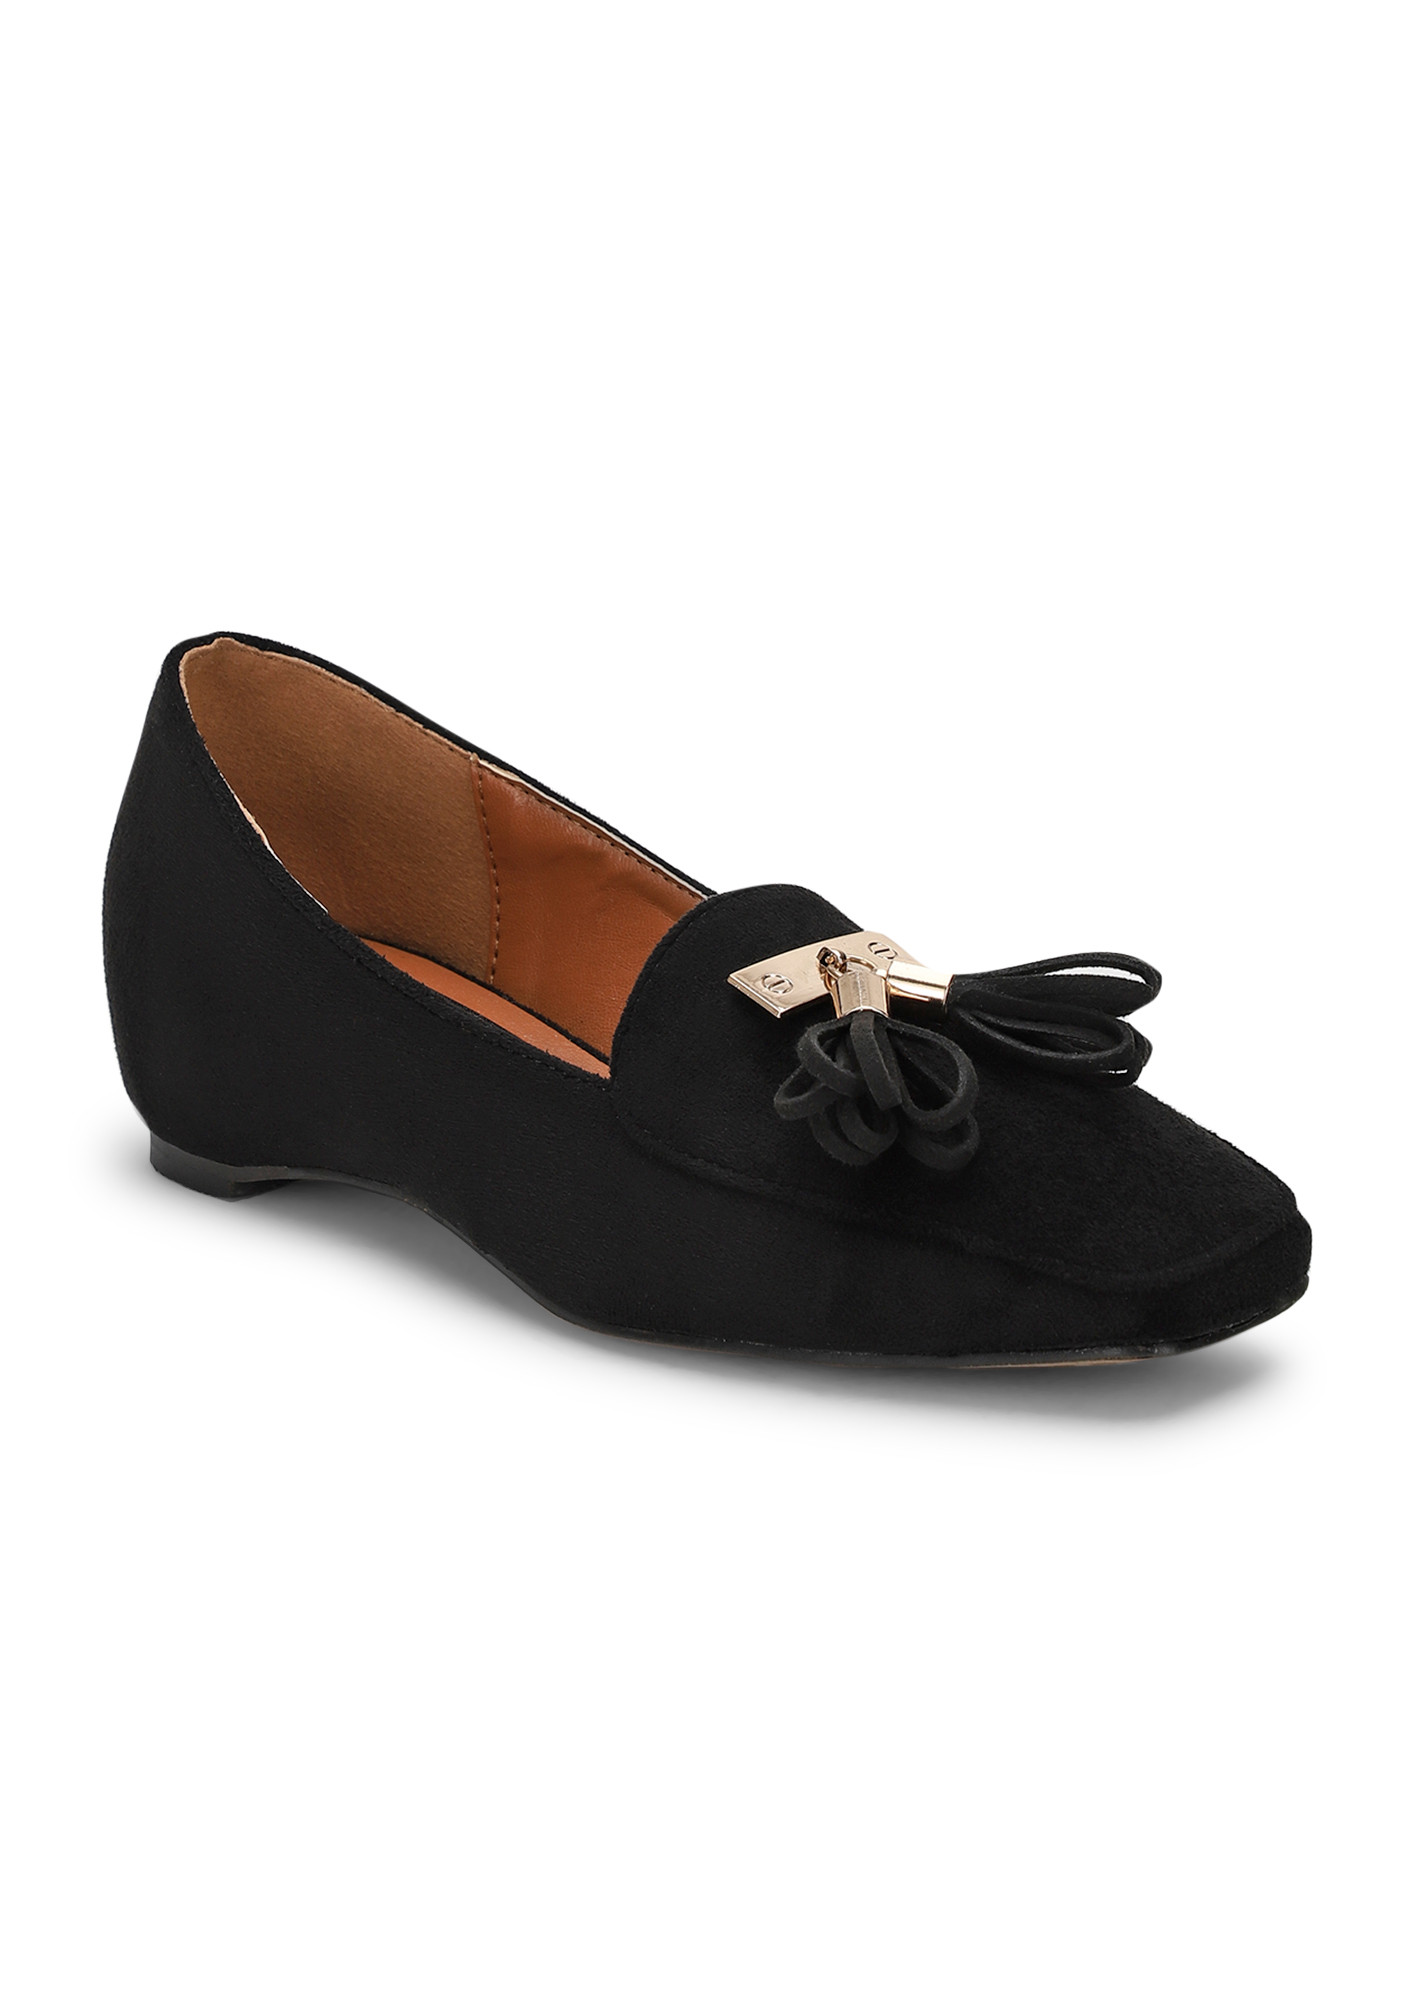 TRUST YOUR TASSELS BLACK LOAFERS